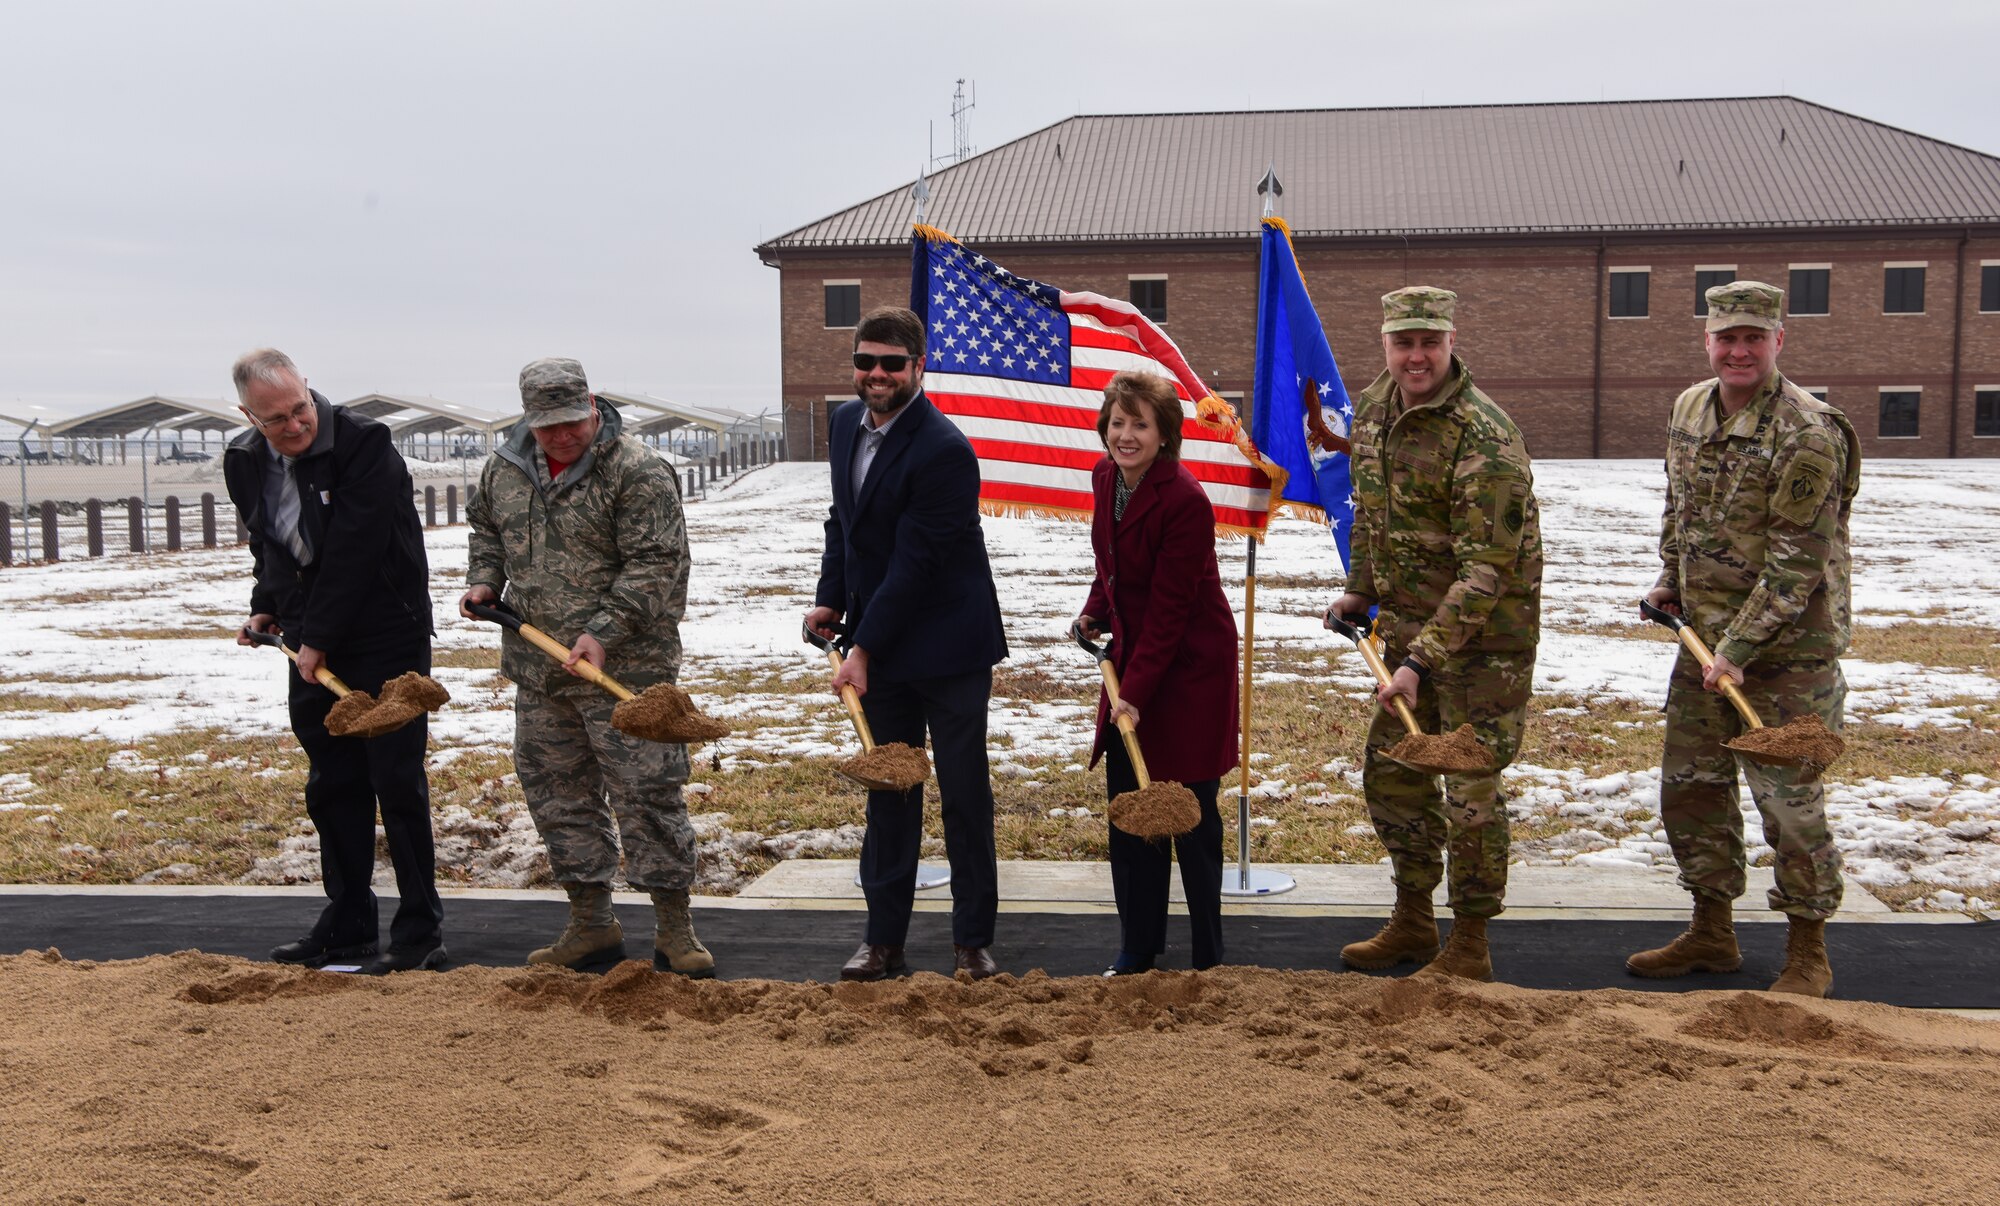 Brig. Gen. John J. Nichols, 509th Bomb Wing commander, Congresswoman Vicky Hartzler and other distinguished guests break ground on the new Operations building construction.